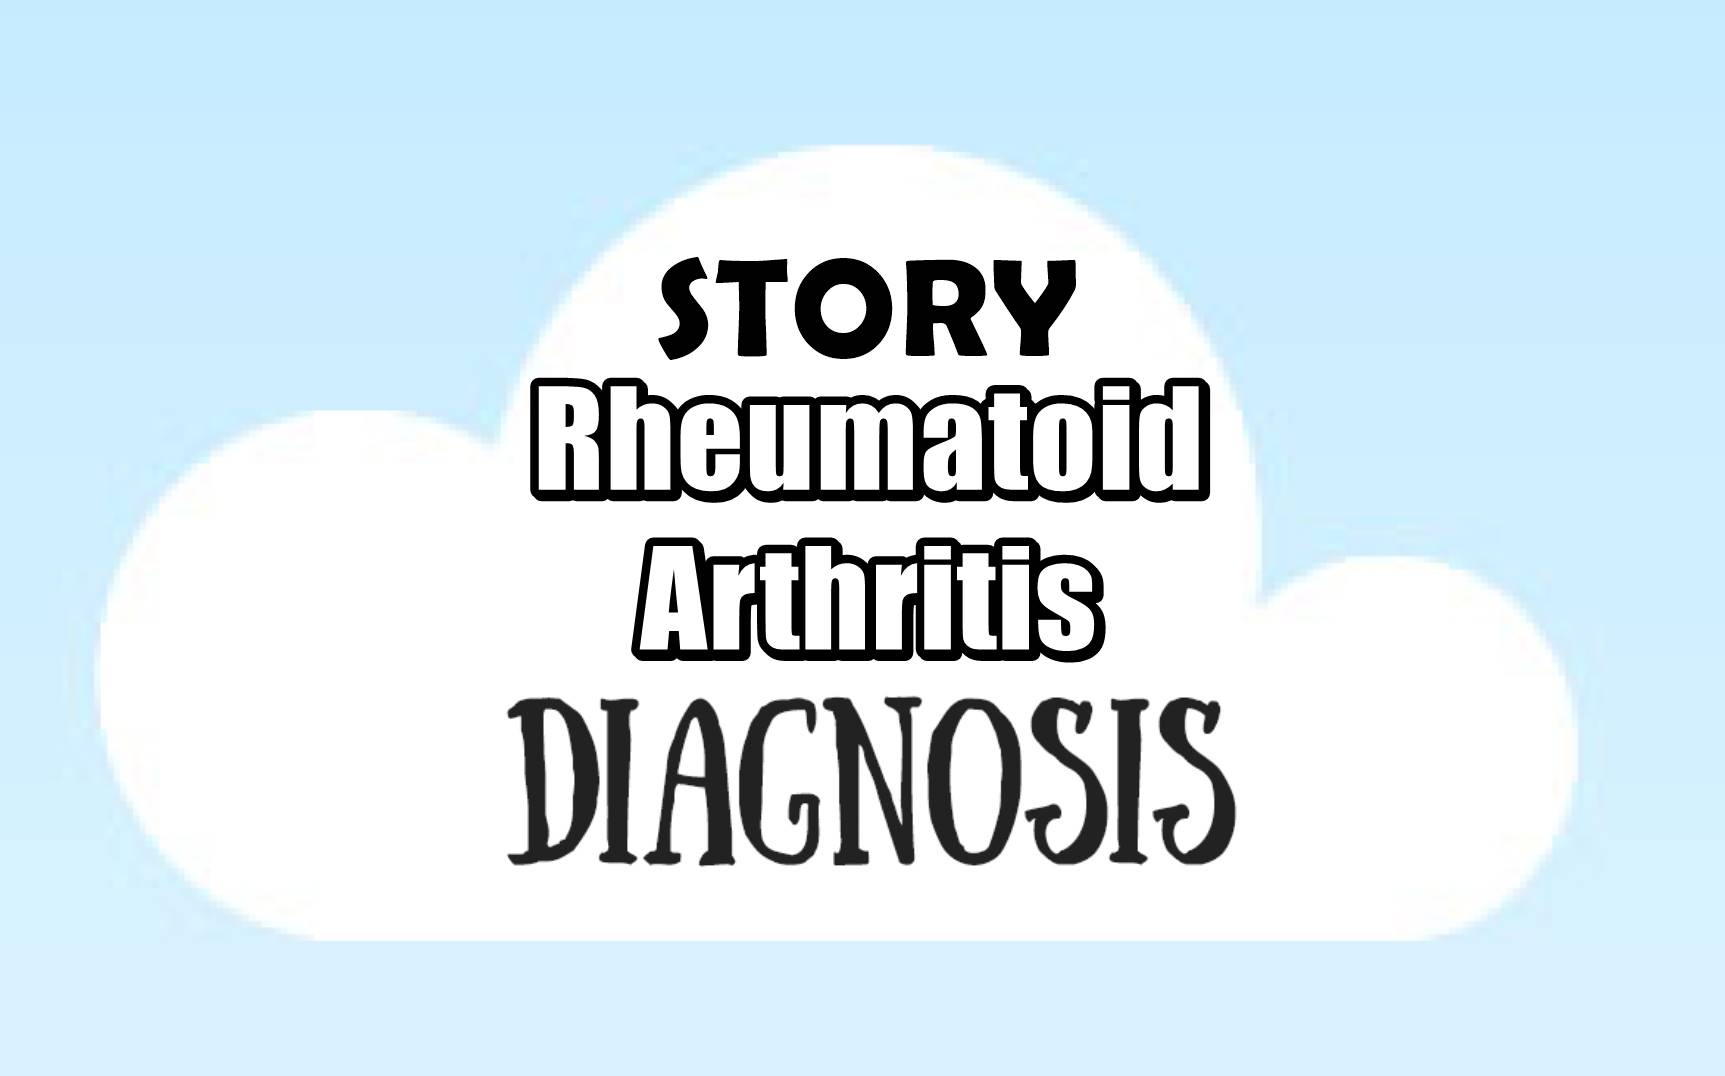 You are currently viewing Rheumatoid Arthritis Diagnosis Stories: Virginia Wimmer